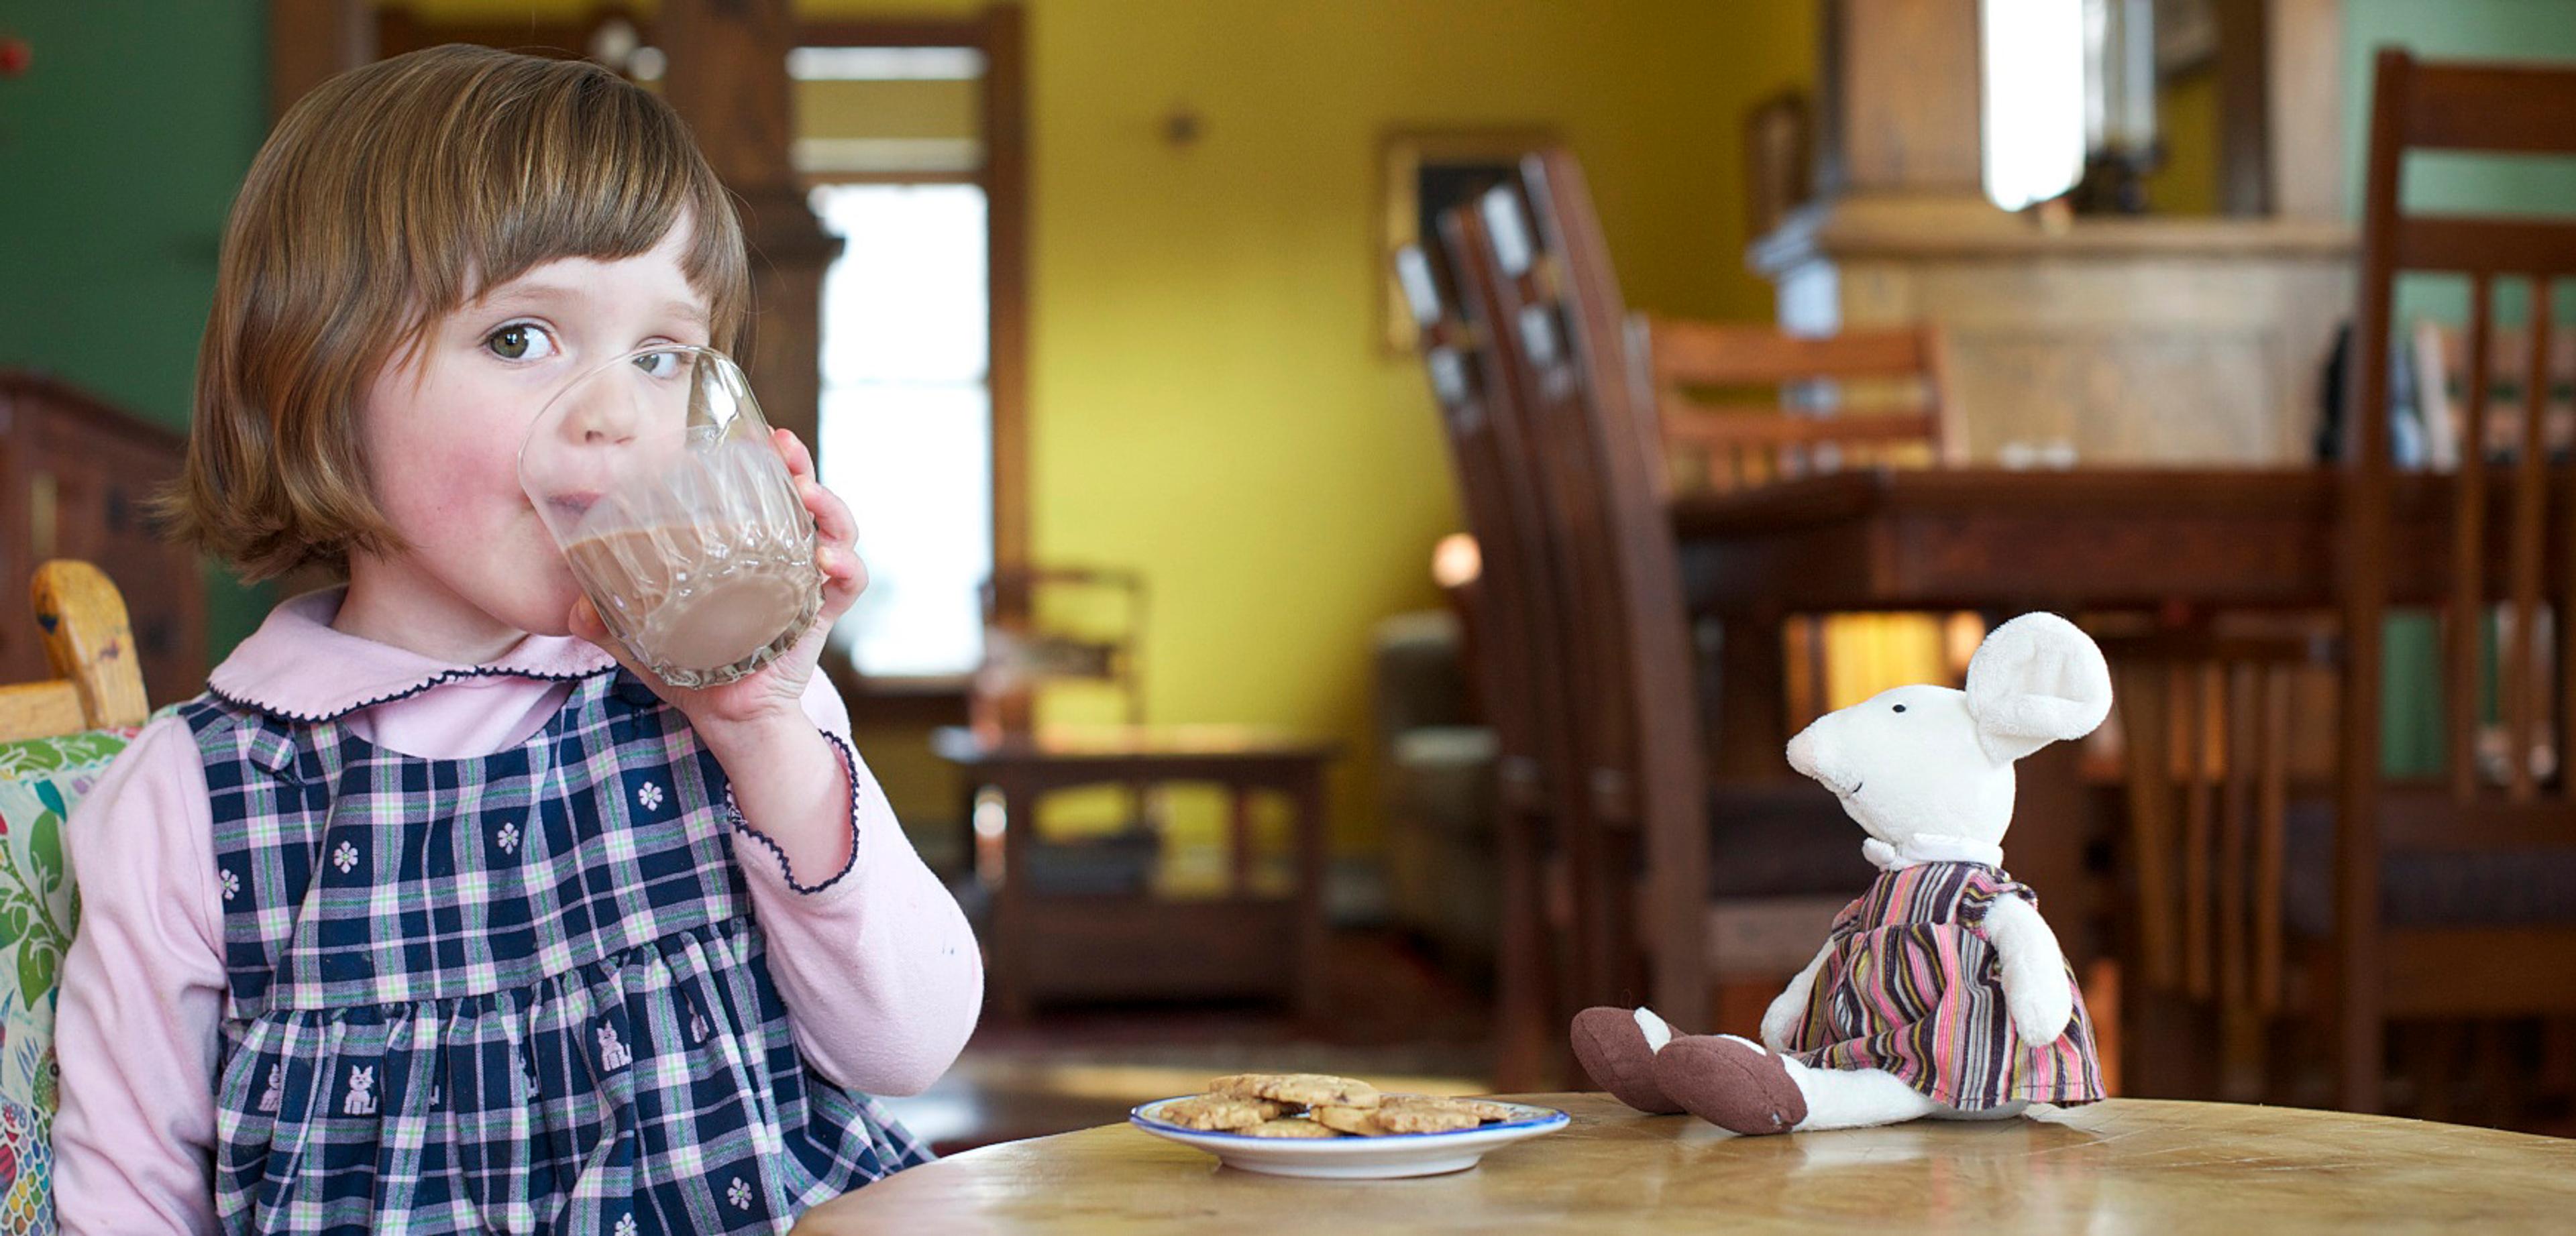 A little girl drinks a glass of chocolate milk with her cute toy mouse and a plate of cookies on the table in front of her.